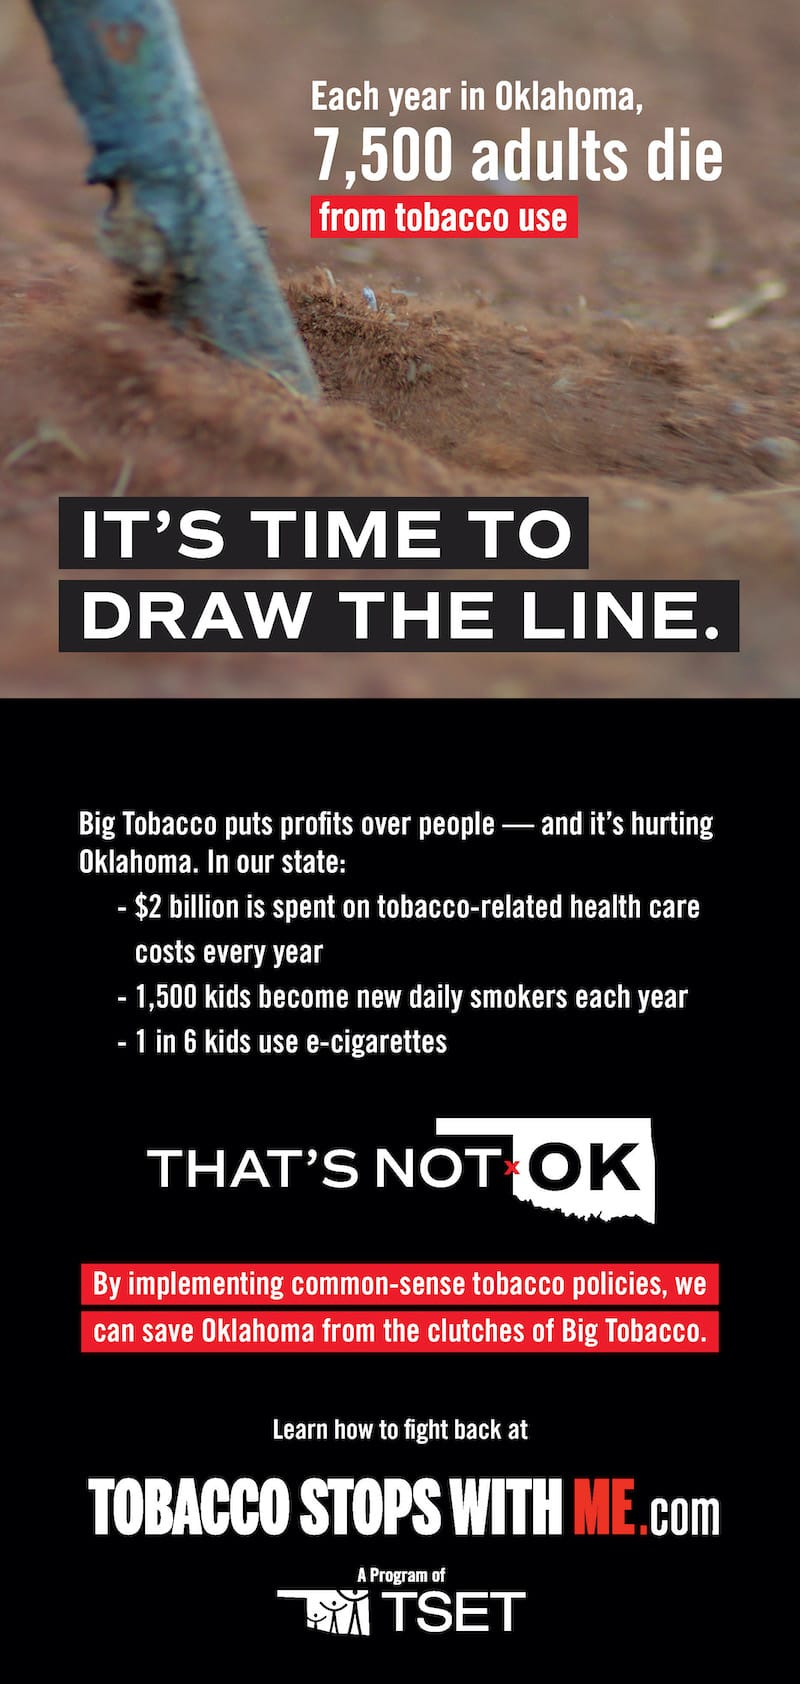 Each year in Oklahoma 7,500 adults die from tobacco use. It's time to draw the line.